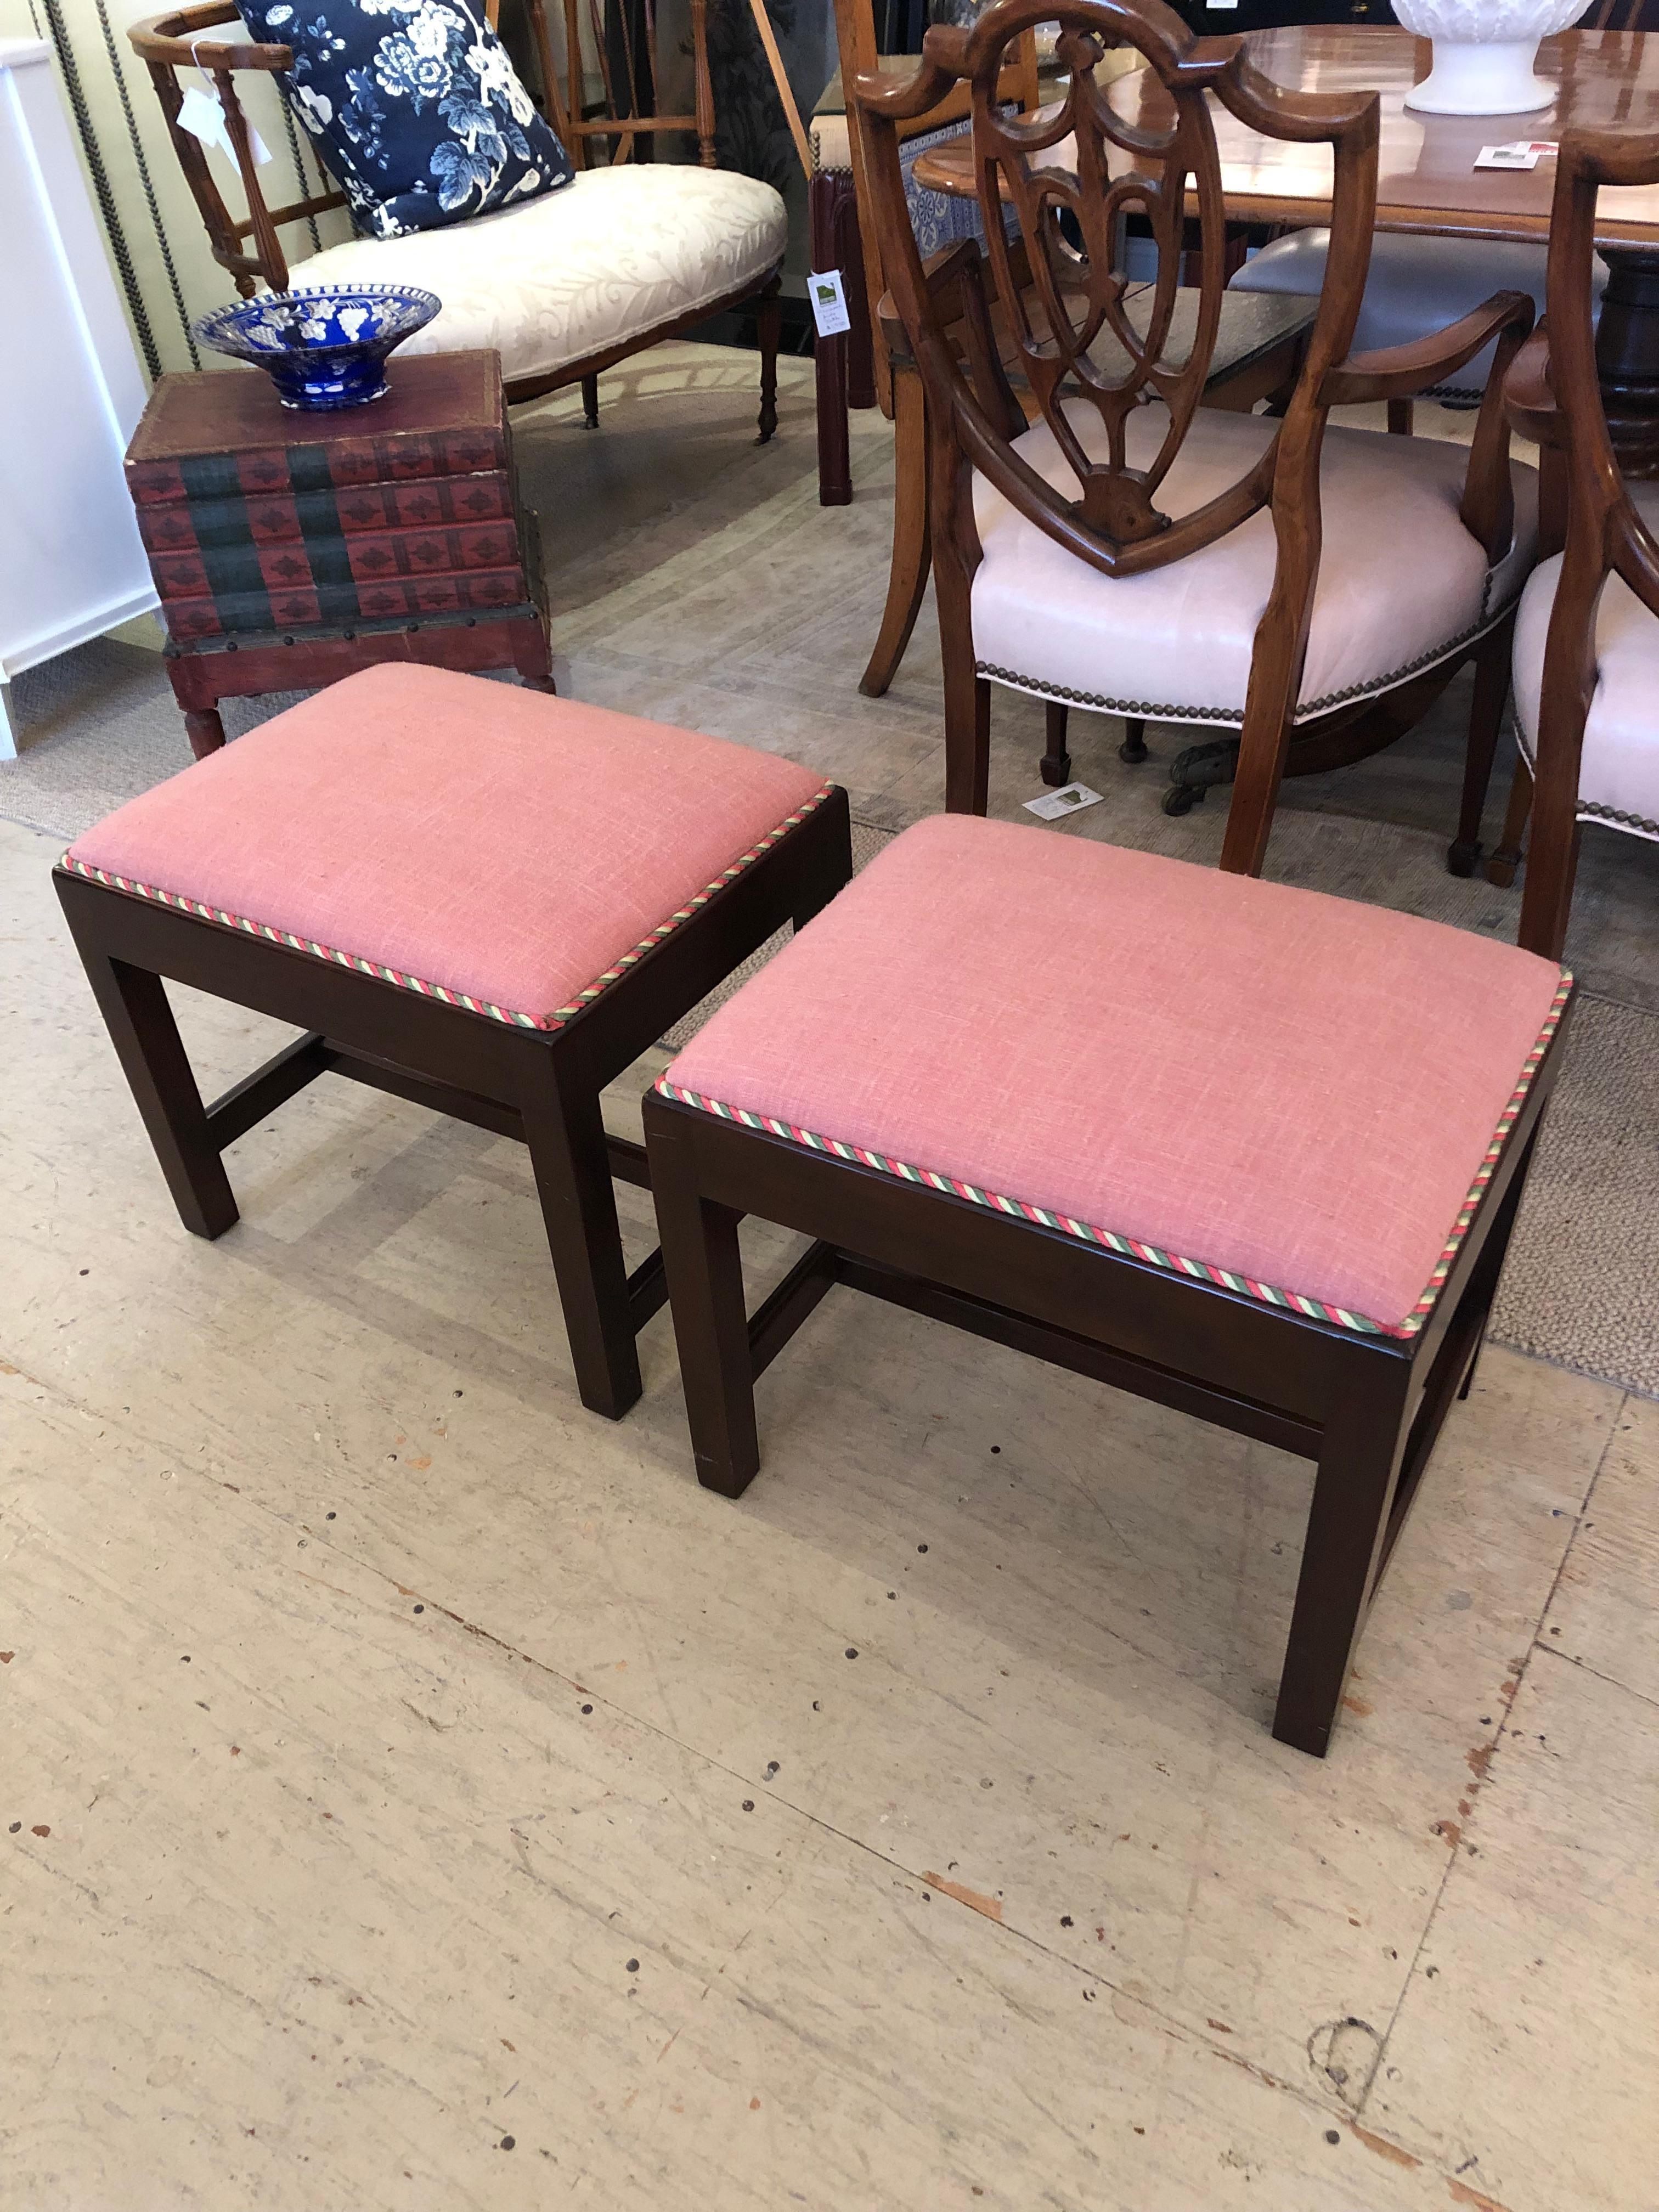 An elegant pair of vintage mahogany & rasberry linen upholstered traditional rectangular benches with decorative trim.